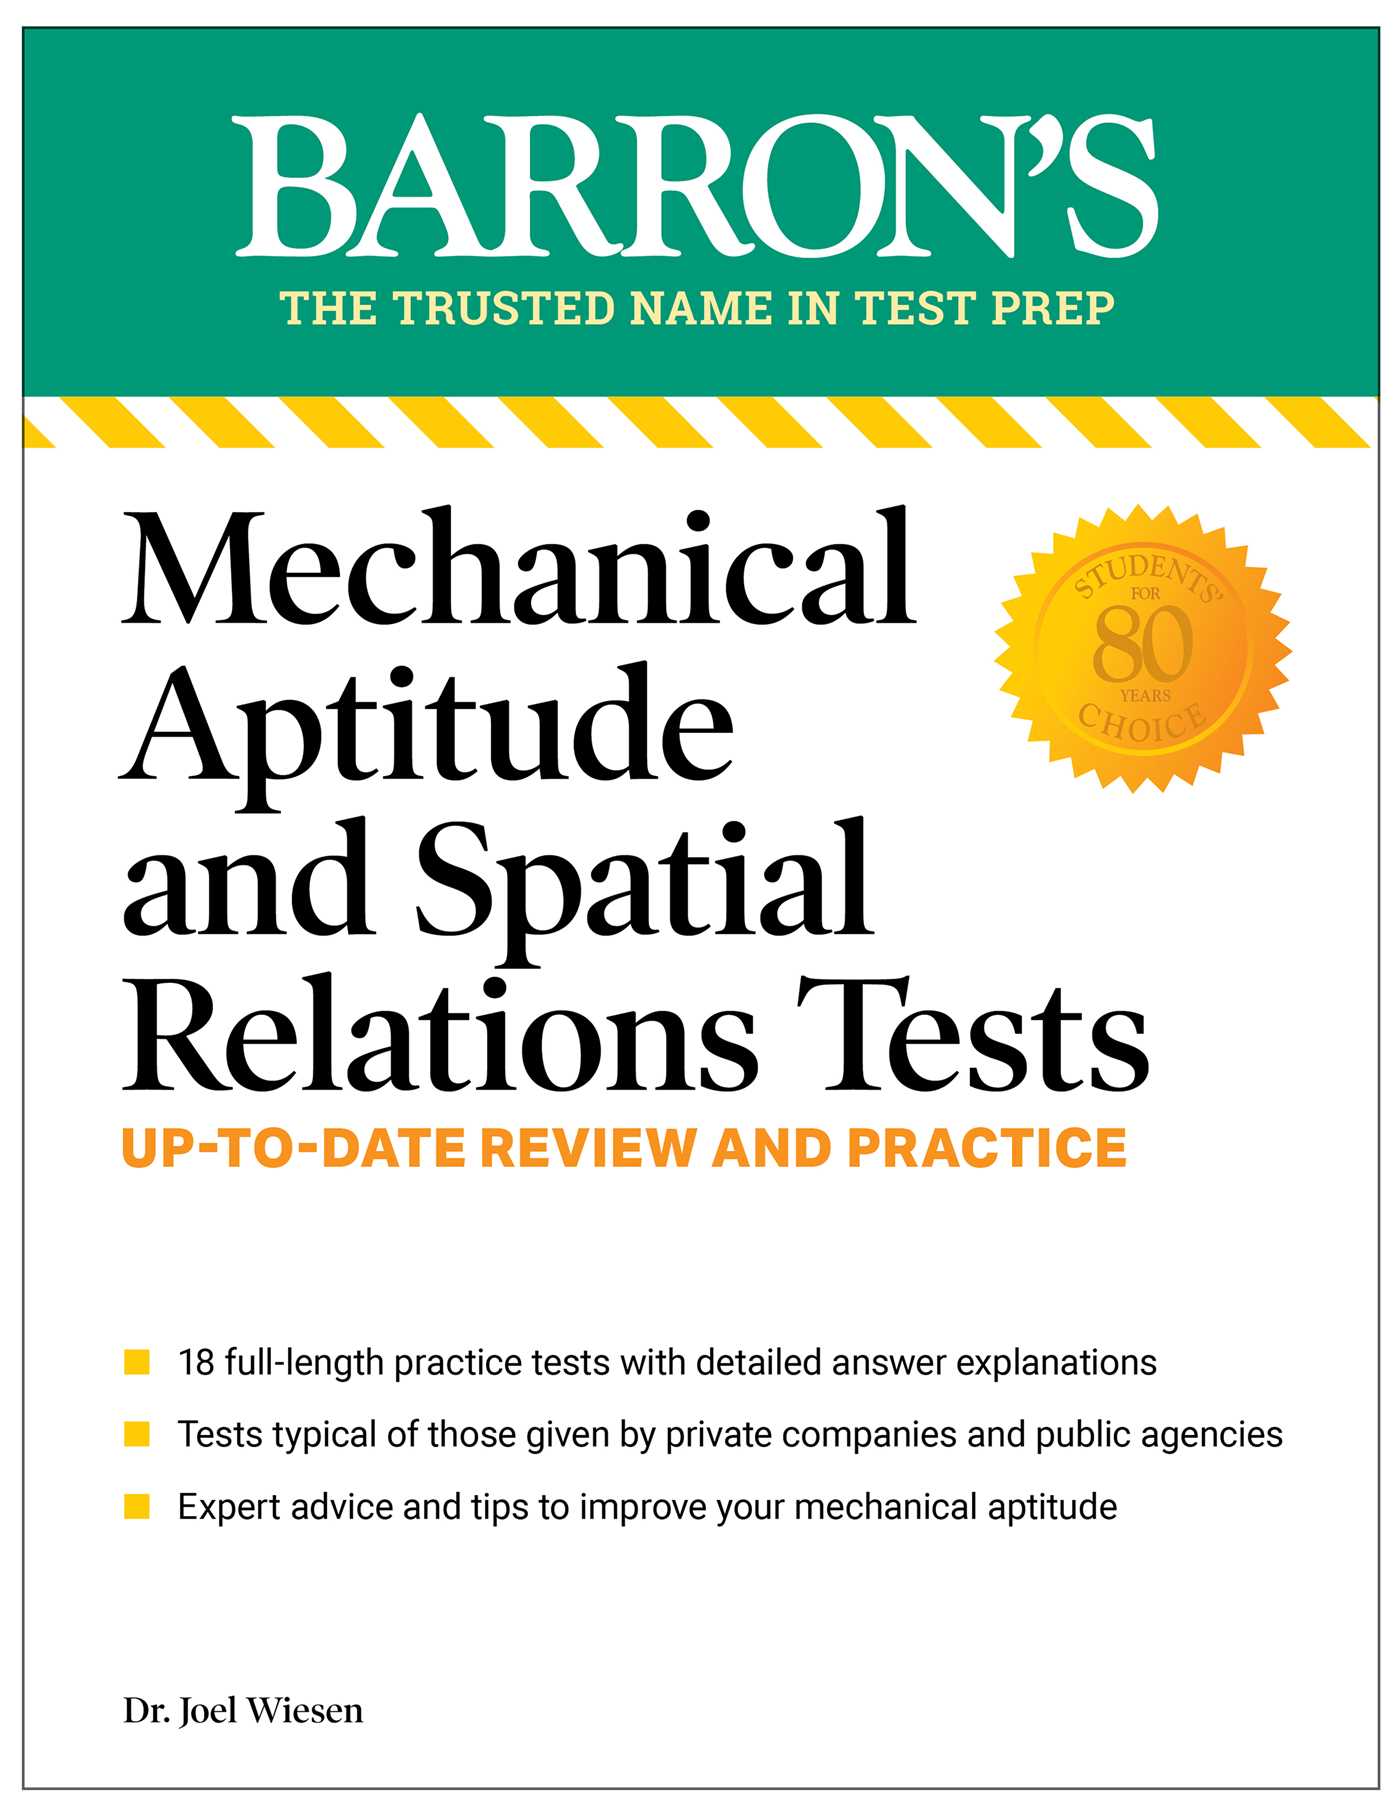 Mechanical Aptitude and Spatial Relations Tests, 4th Edition